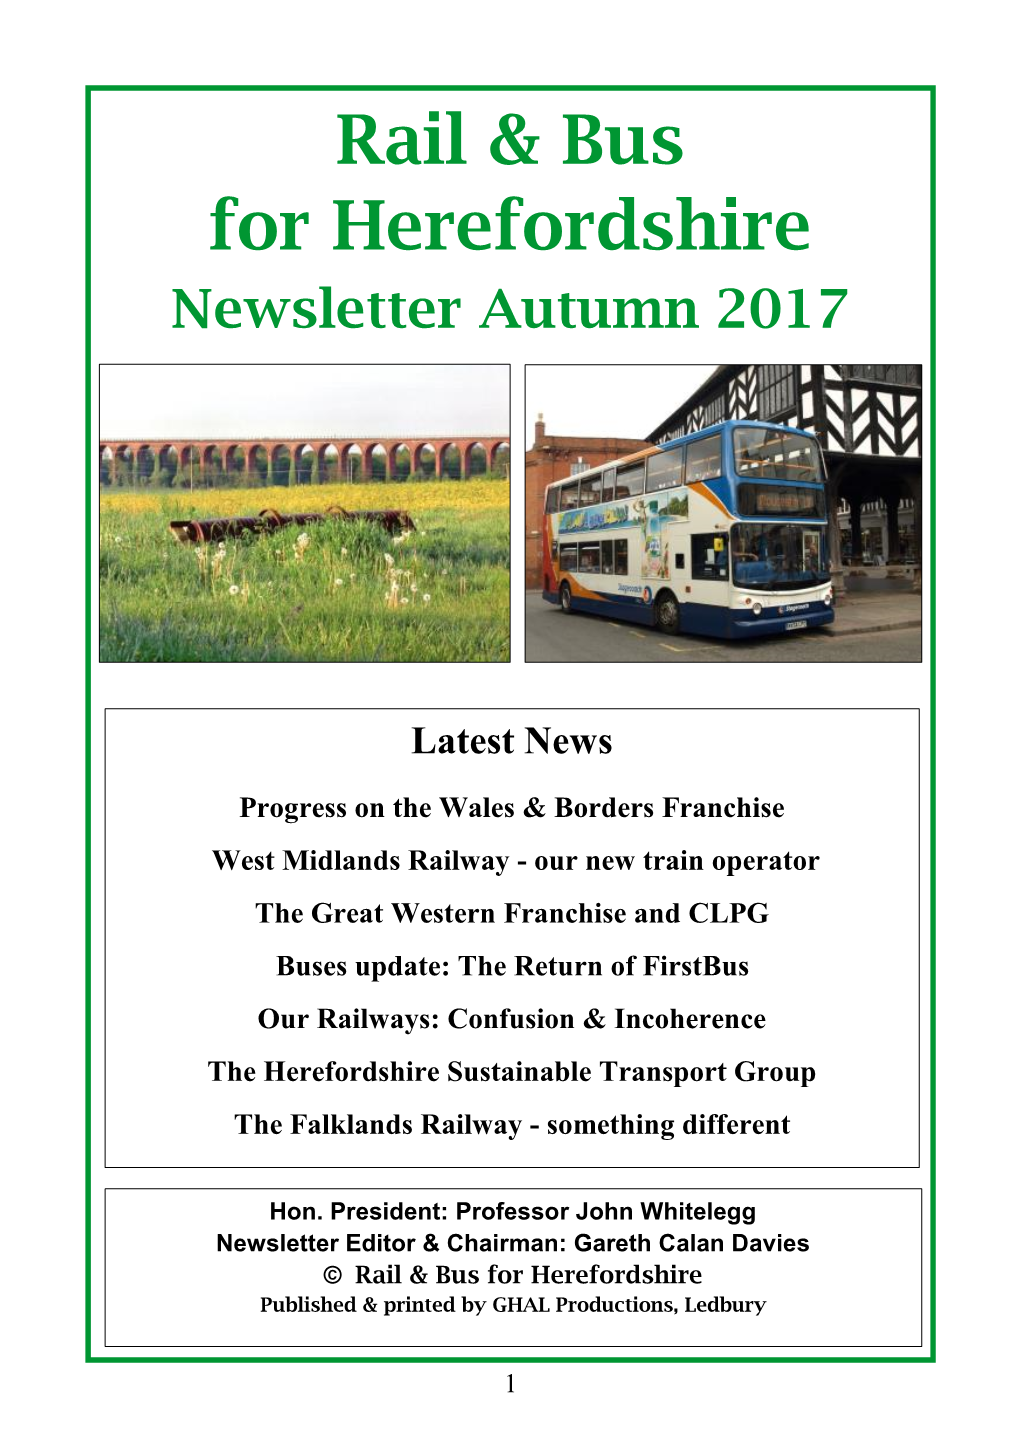 Rail & Bus for Herefordshire